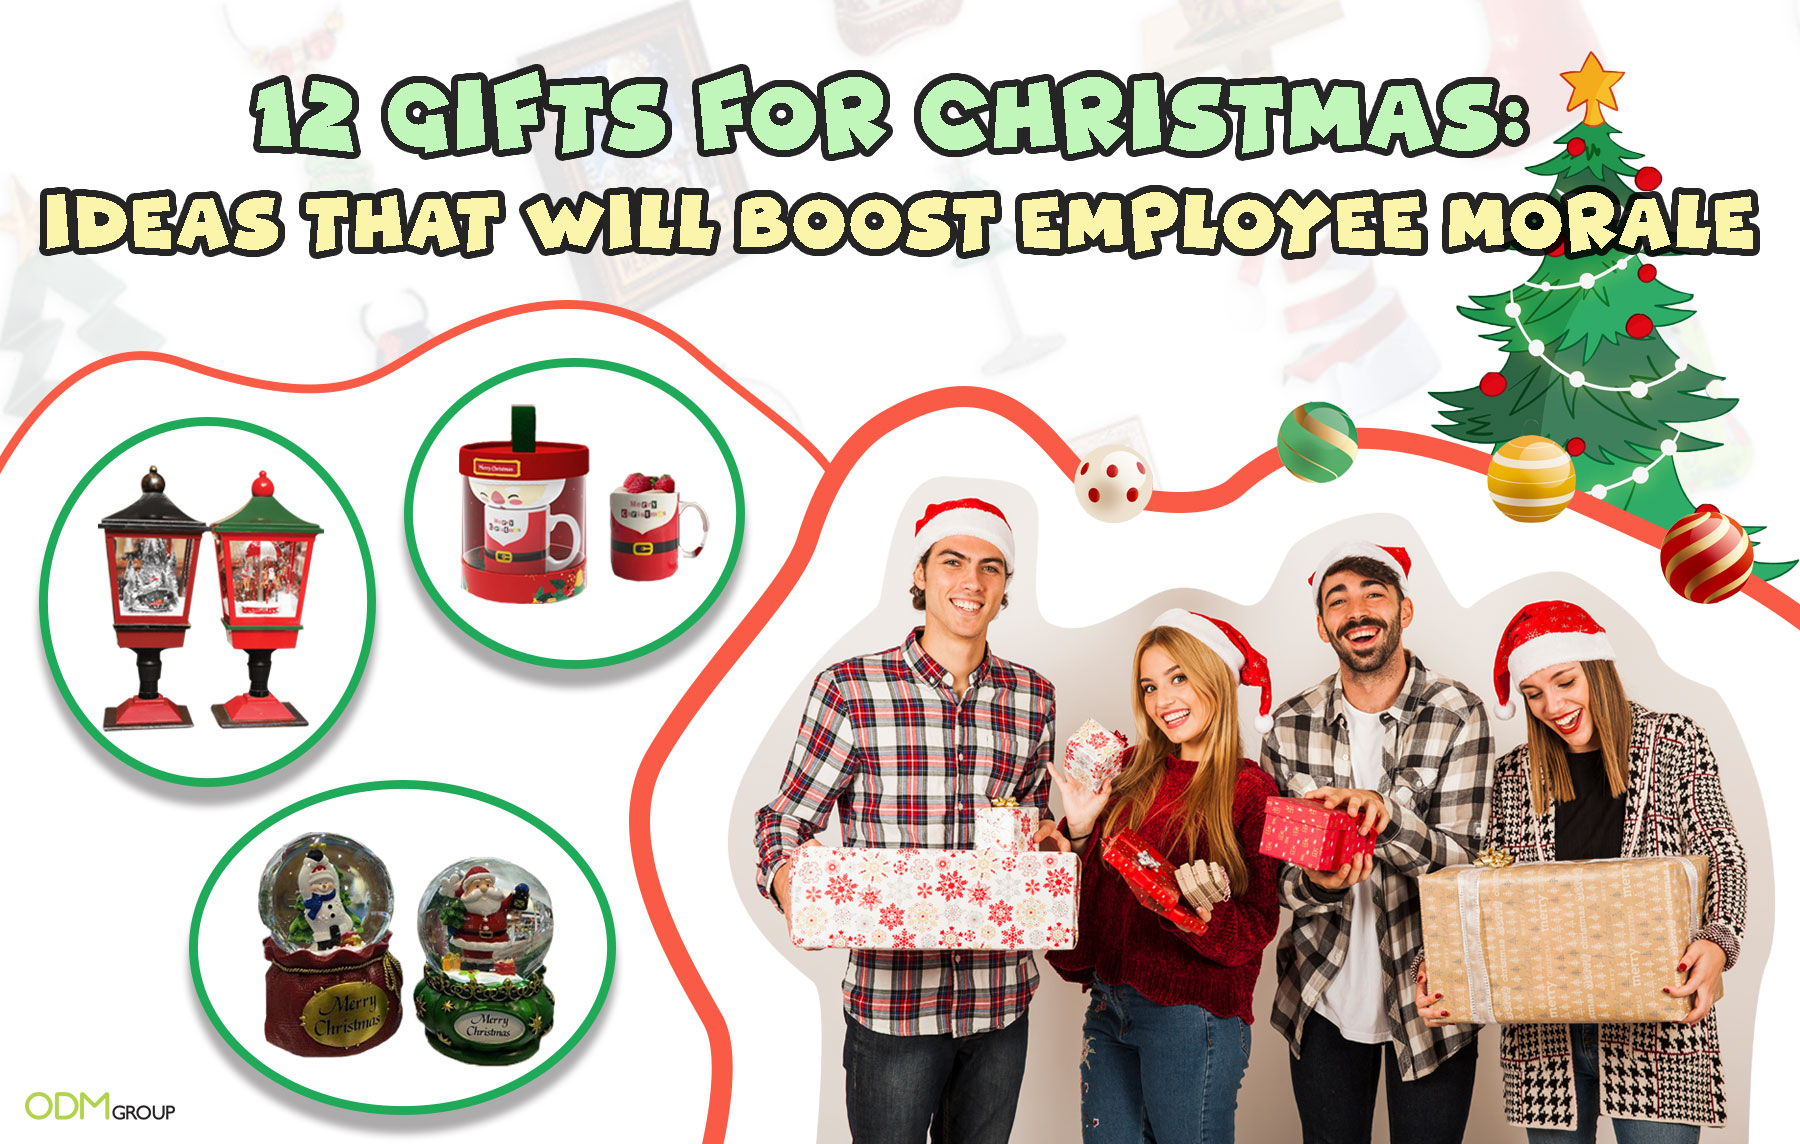 Festive holiday gift for office staff including lanterns, mugs, and snow globes.